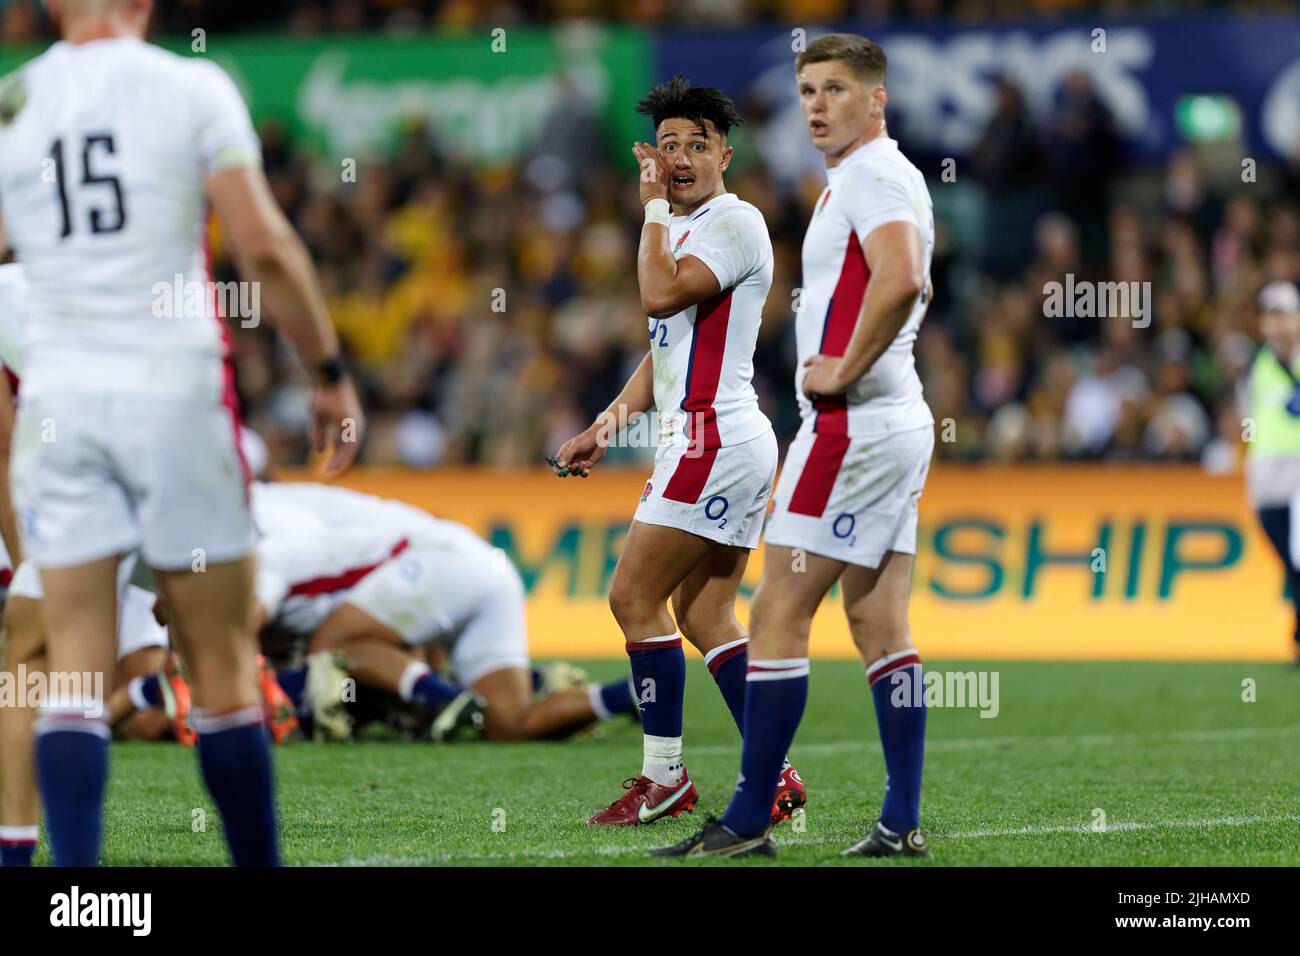 SYDNEY, AUSTRALIA - JULY 16: Marcus Smith of England communicates with his team mates during game three of the International Test Match series between the Australian Wallabies and England at the SCG on July 16, 2022 in Sydney, Australia Credit: IOIO IMAGES/Alamy Live News Stock Photo